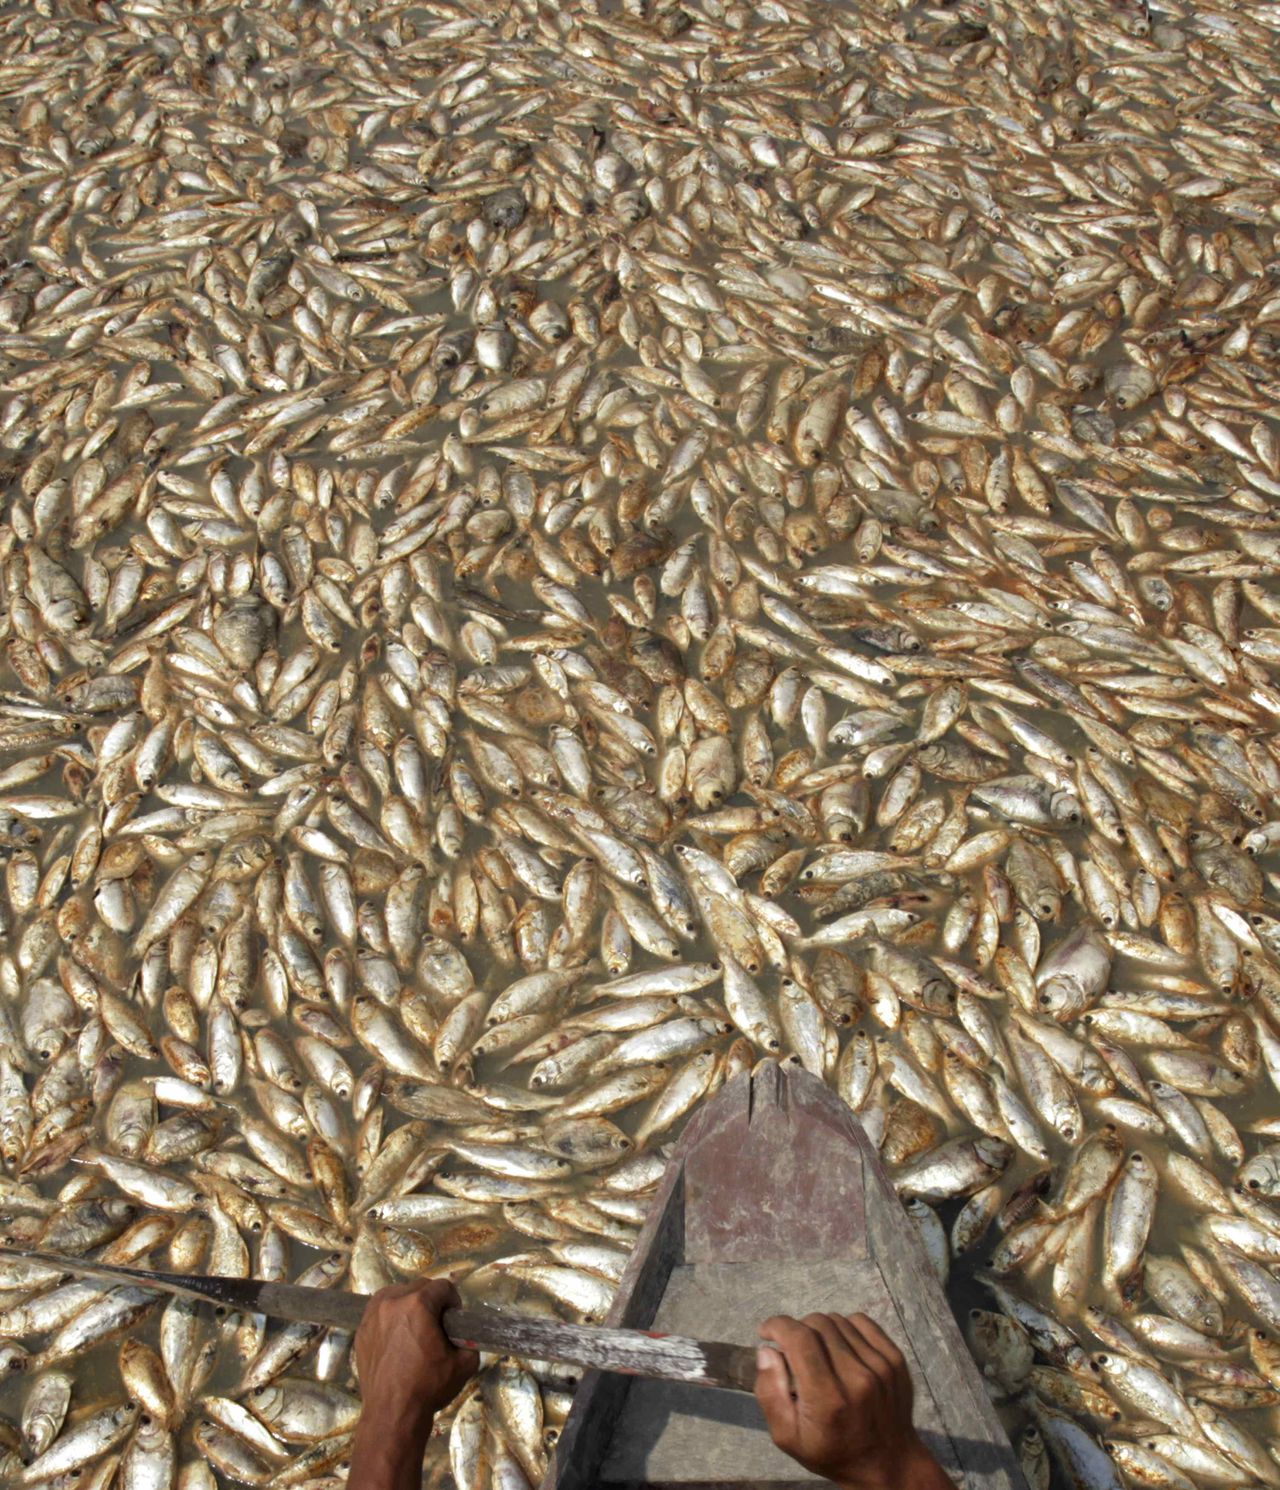 A fisherman paddles his canoe through dead fish along Manaquiri River, a tributary of the Amazon, near the city of Manaquiri, November 28, 2009. The world's biggest rainforest is suffering from seasonal drought, killing tonnes of fish. Picture taken November 28, 2009. REUTERS/Paulo Whitaker (BRAZIL ENVIRONMENT SOCIETY DISASTER)